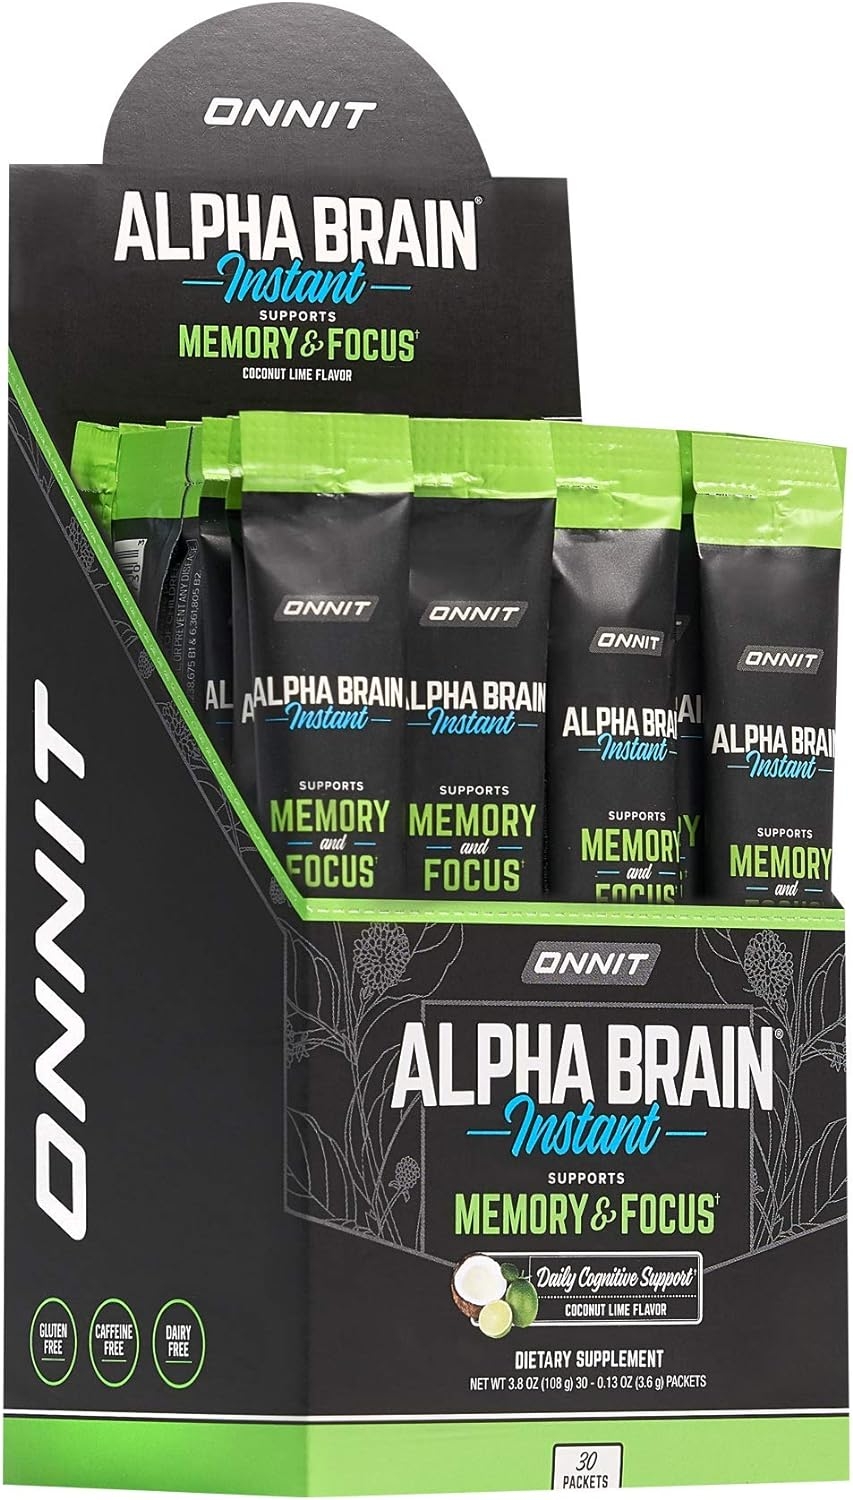 Brain Booster Supplement, ONNIT Alpha Brain Instant (30ct Box) - Premium Nootropic Brain Booster Supplement - Boost Focus, Concentration & Memory - Alpha GPC, L Theanine, Bacopa Monnieri, Huperzine A, Vitamin B6